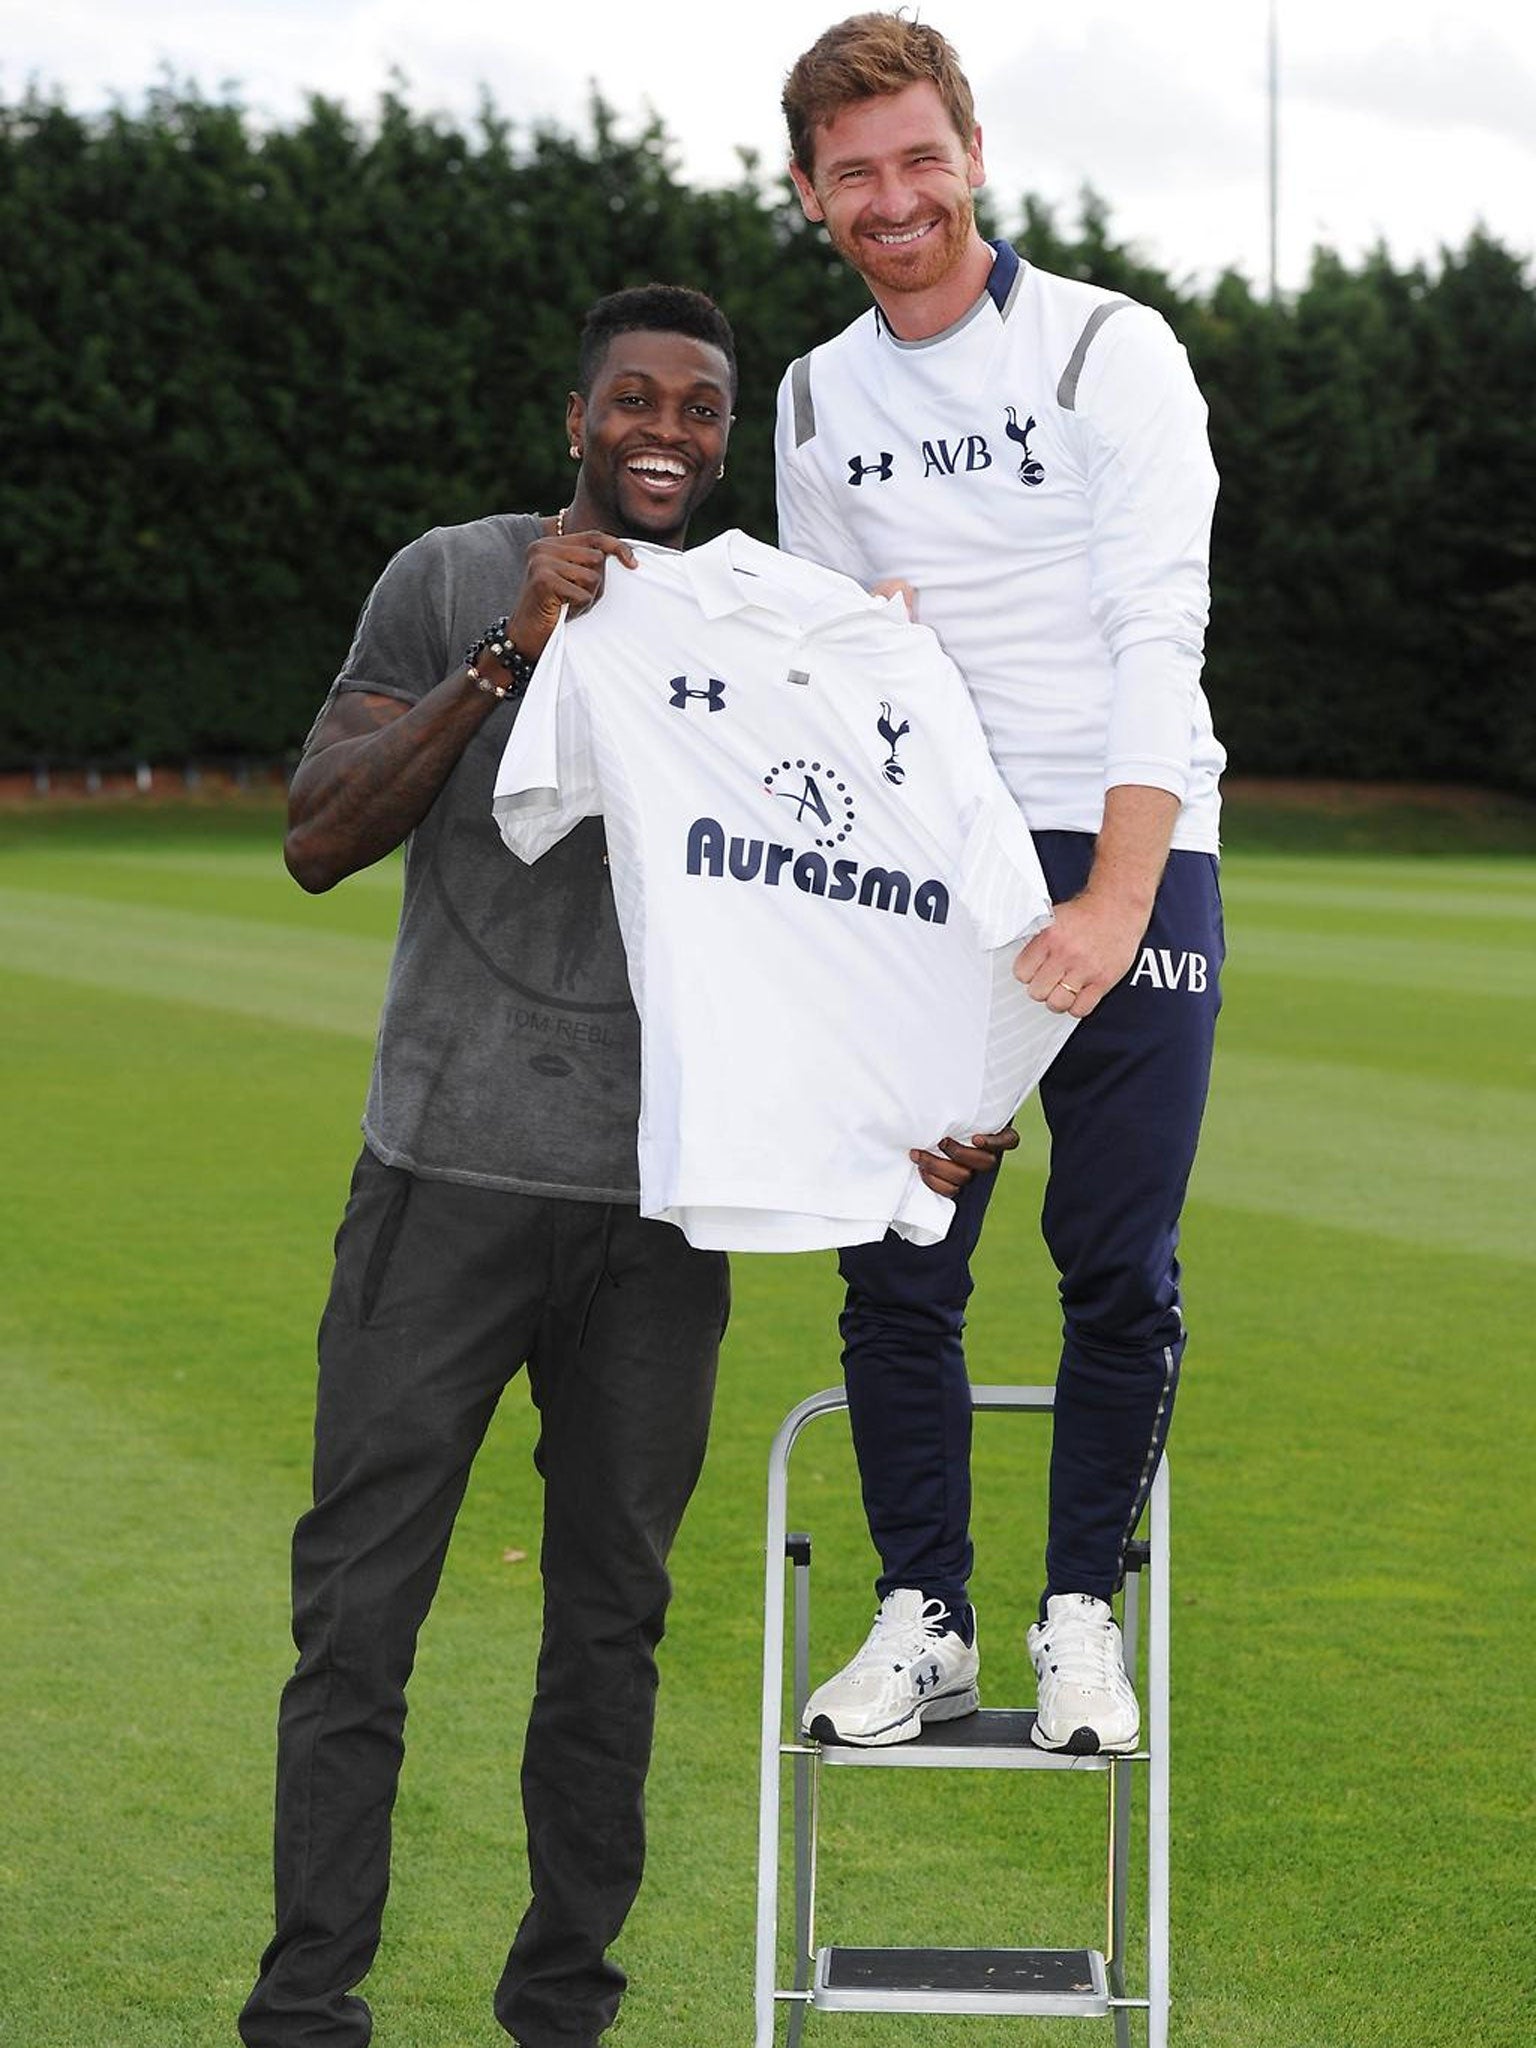 Tottenham Hotspur seem to be enjoying their pre-season: “One final photo of @SheyiAdebayor with Andre...it was all smiles at the Lodge today! #COYS”